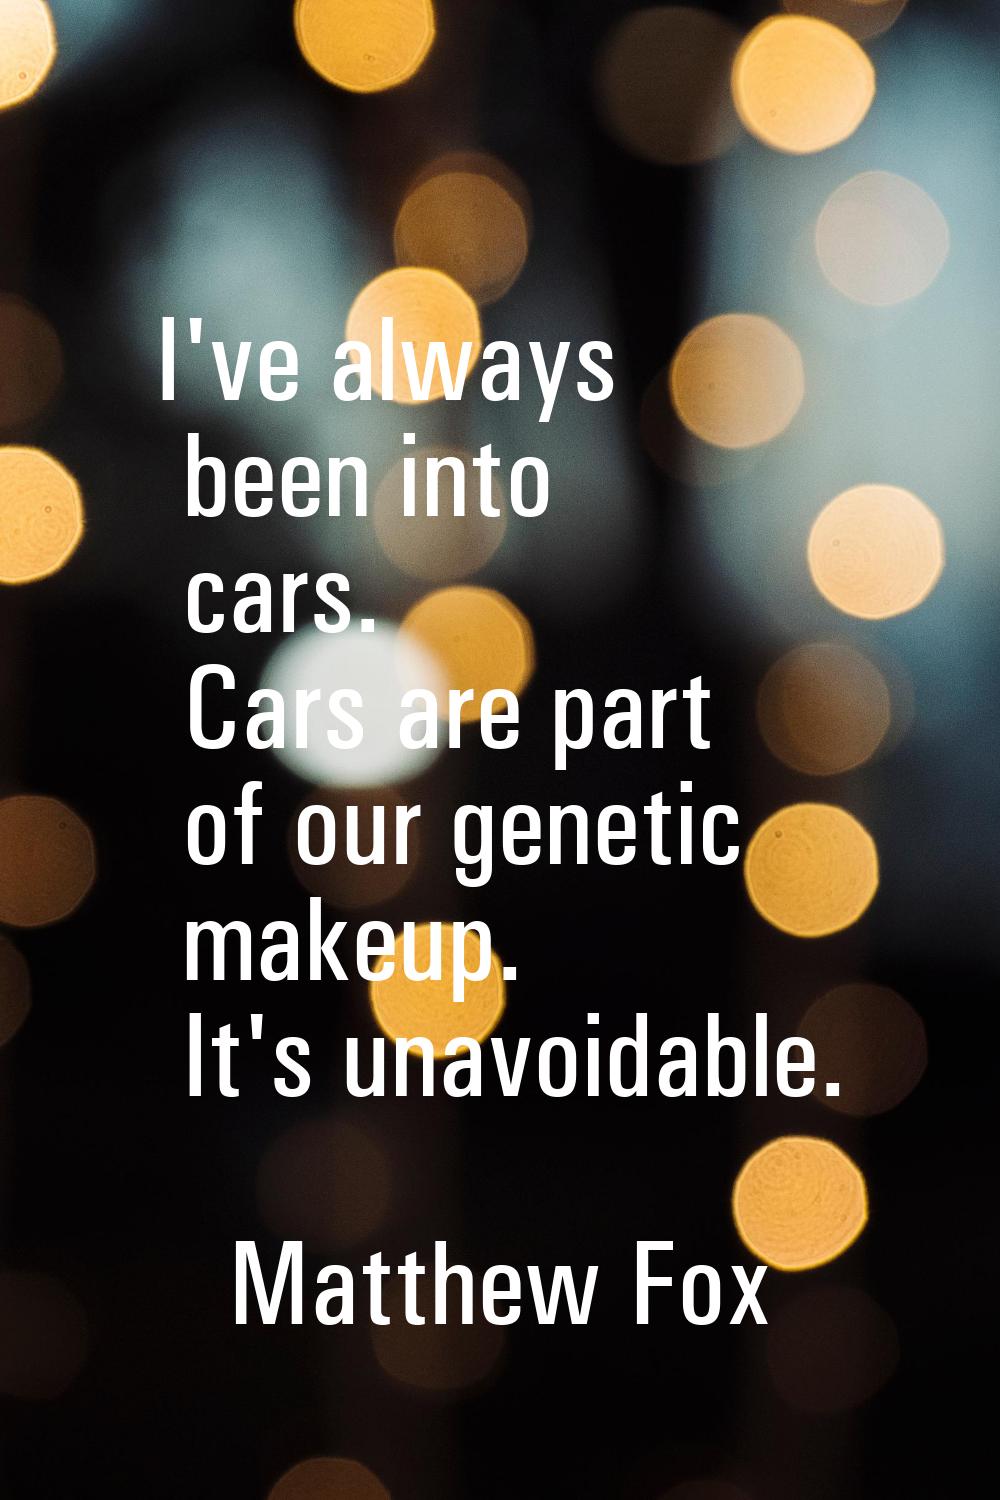 I've always been into cars. Cars are part of our genetic makeup. It's unavoidable.